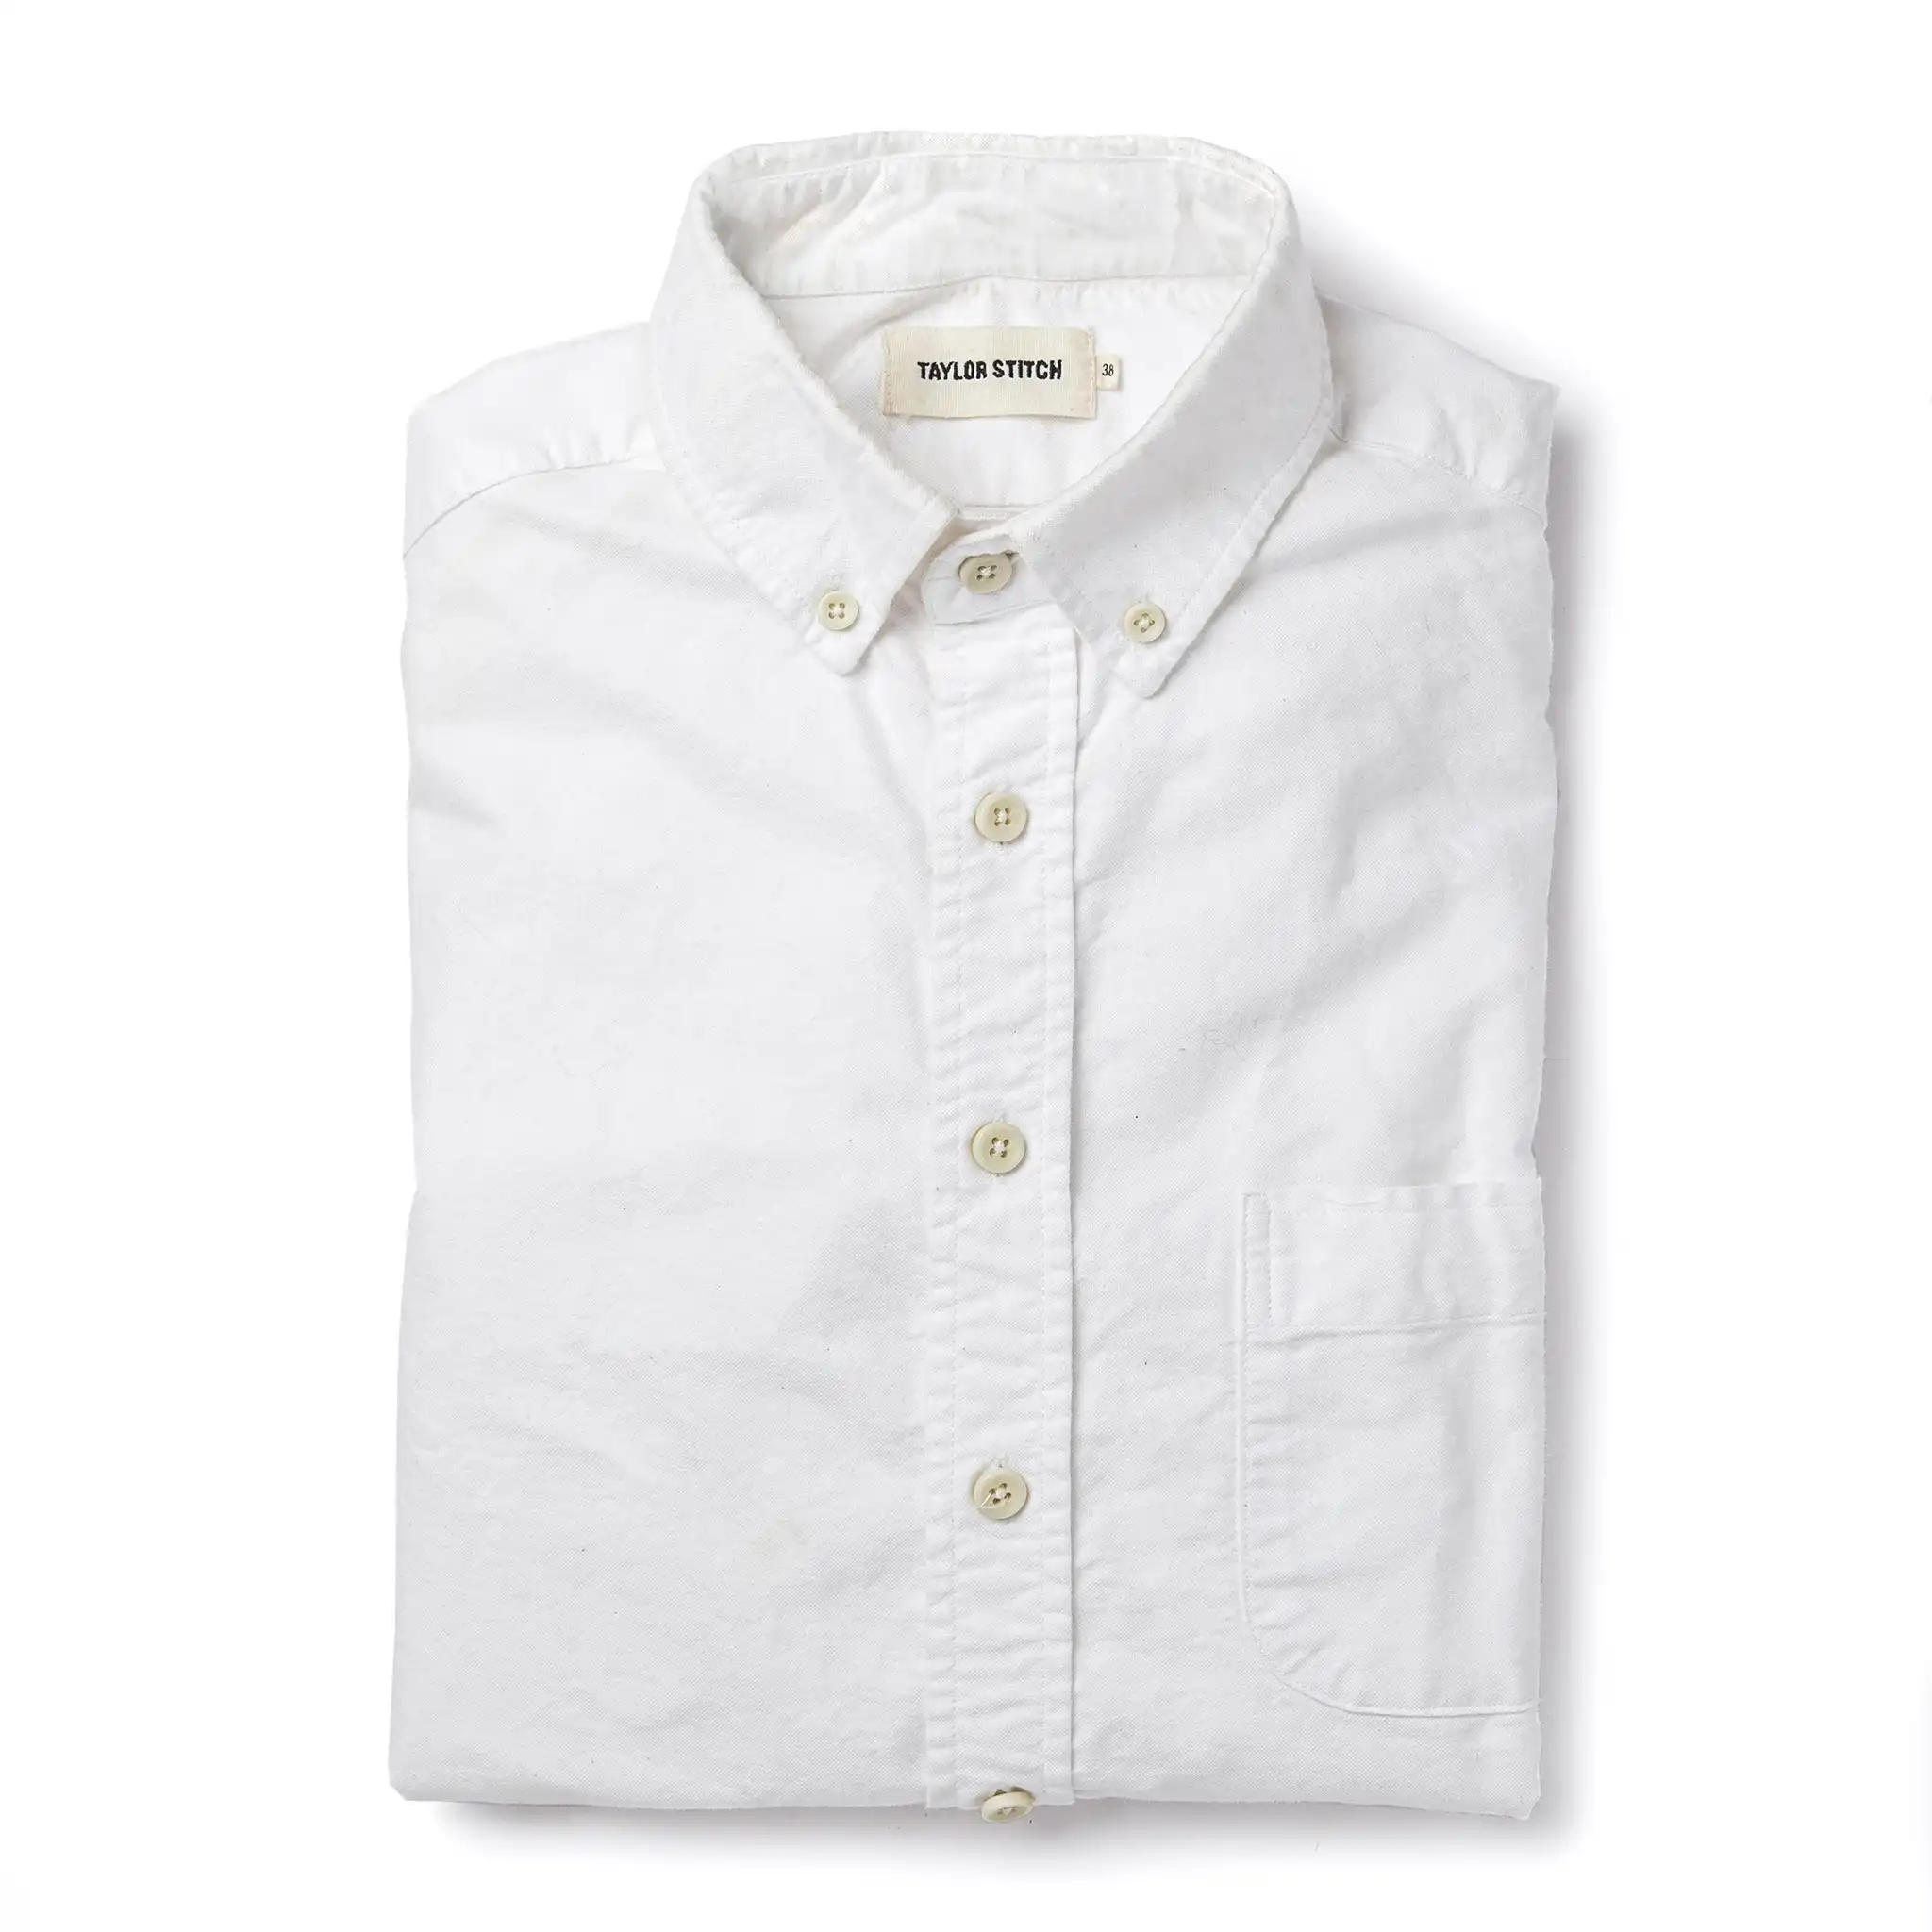 Taylor Stitch Jack Shirt in White Everyday Oxford